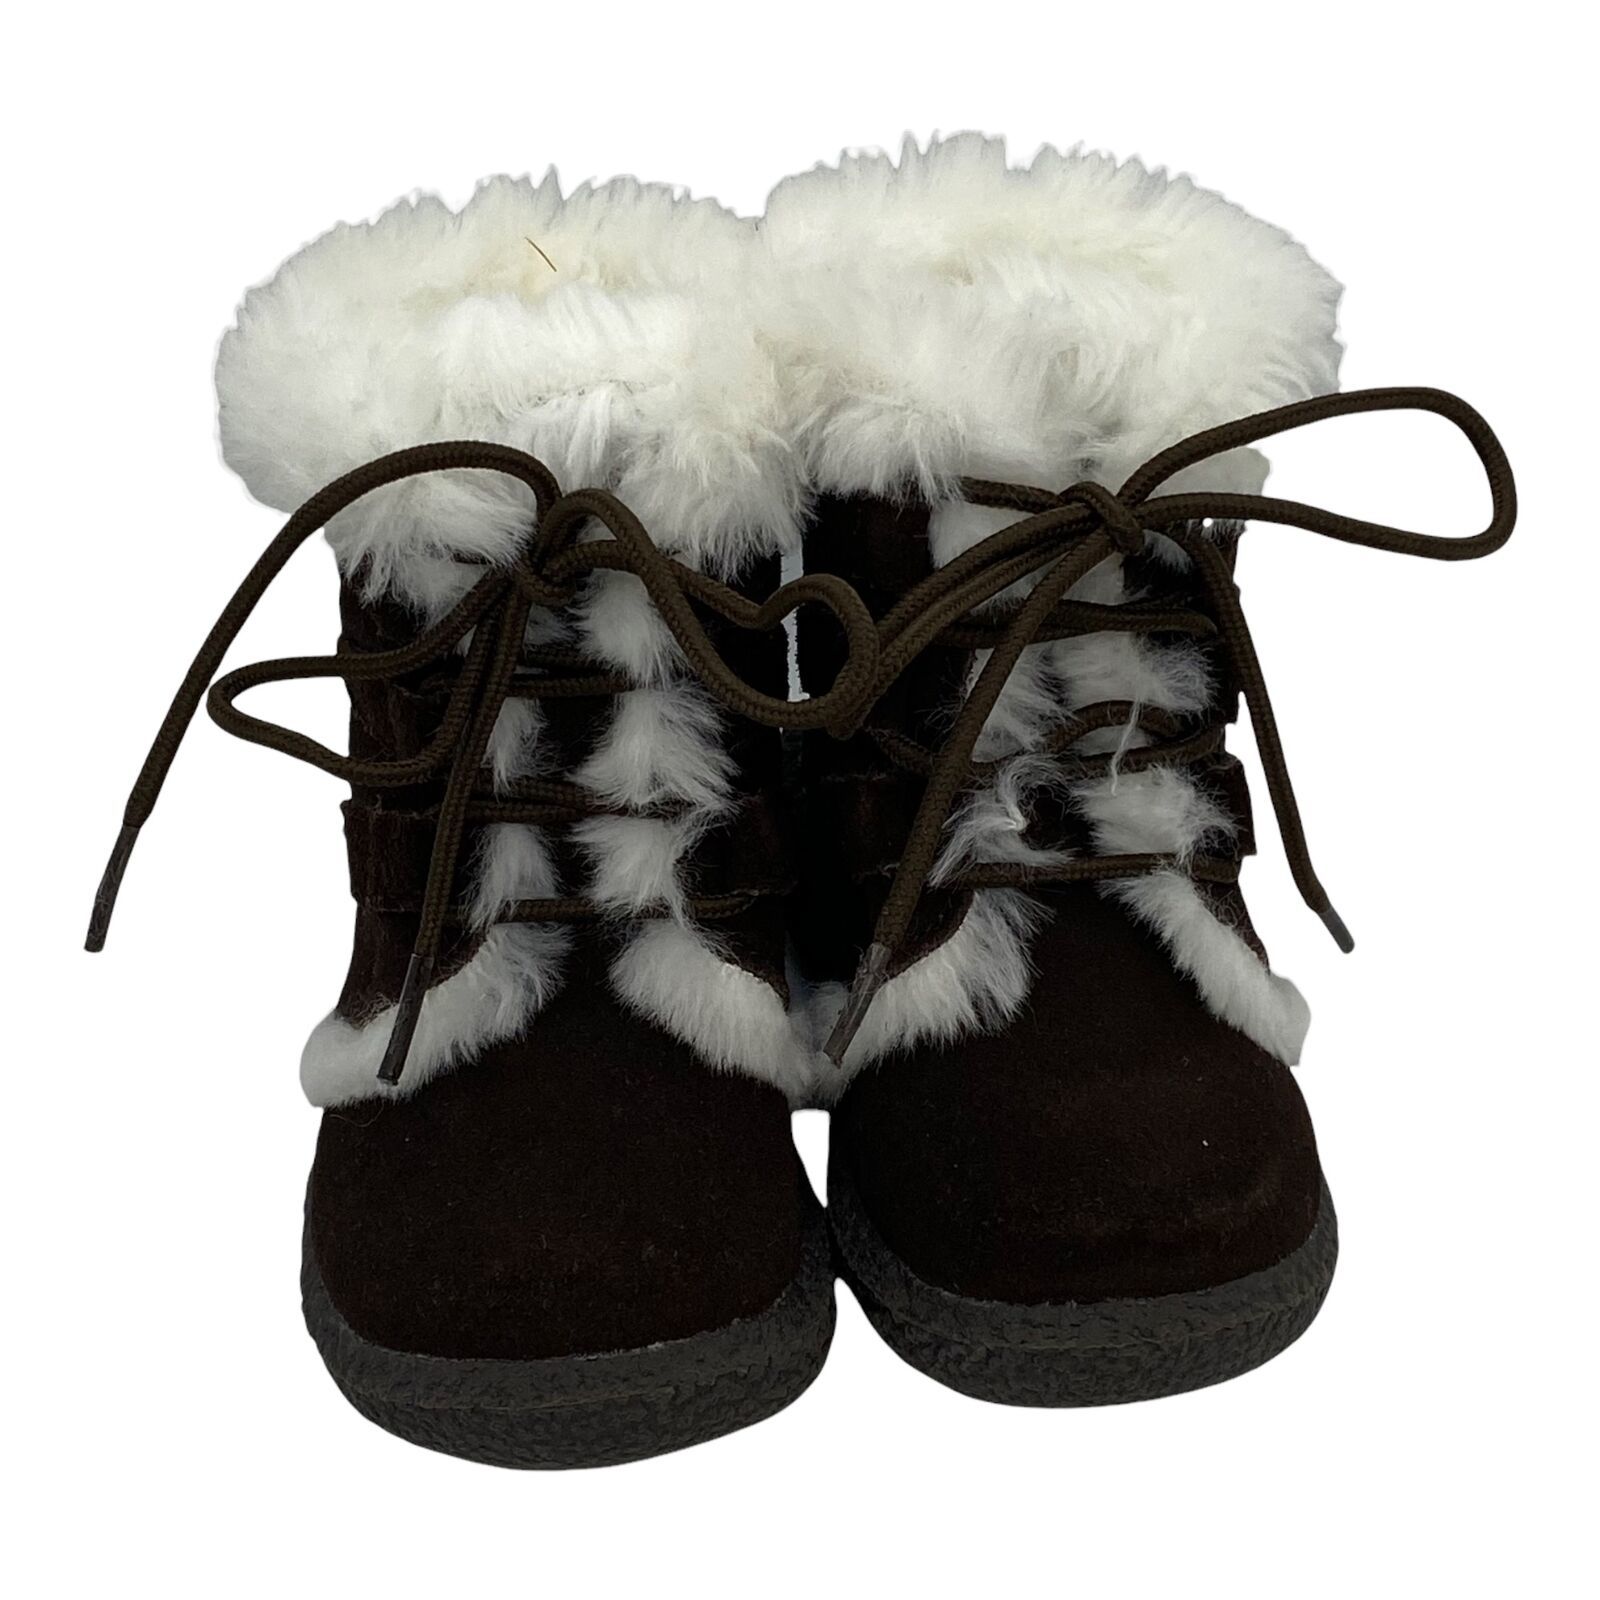 Janie and Jack Leather Faux-Fur Trim Brown Boots Infant Girls Sz 4 - $24.00